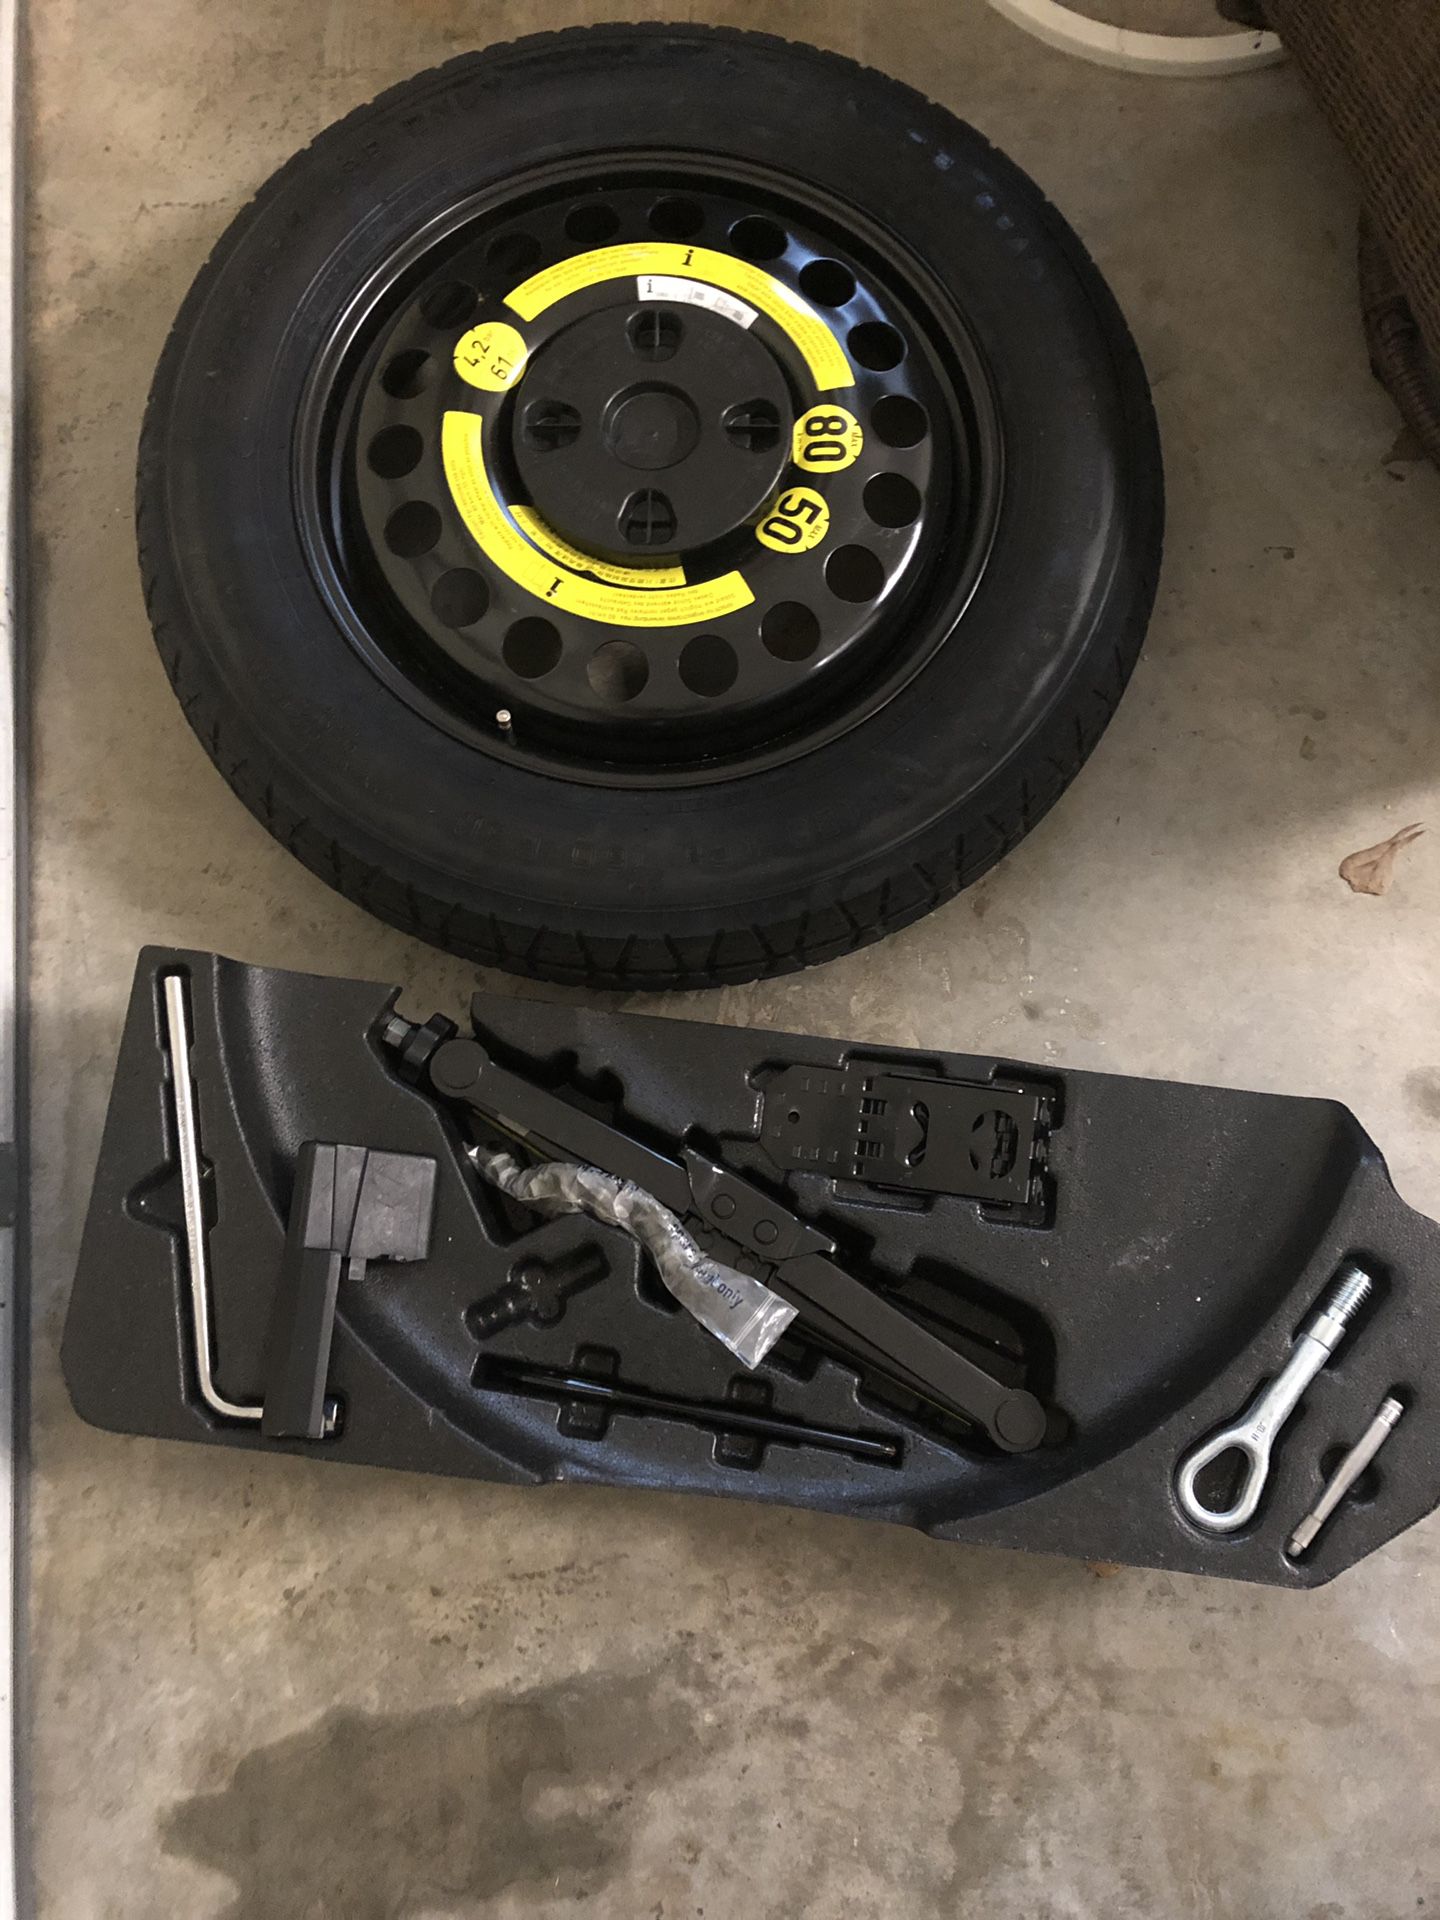 2010 MERCEDES ML 350 spare tire, jack, and tool kit